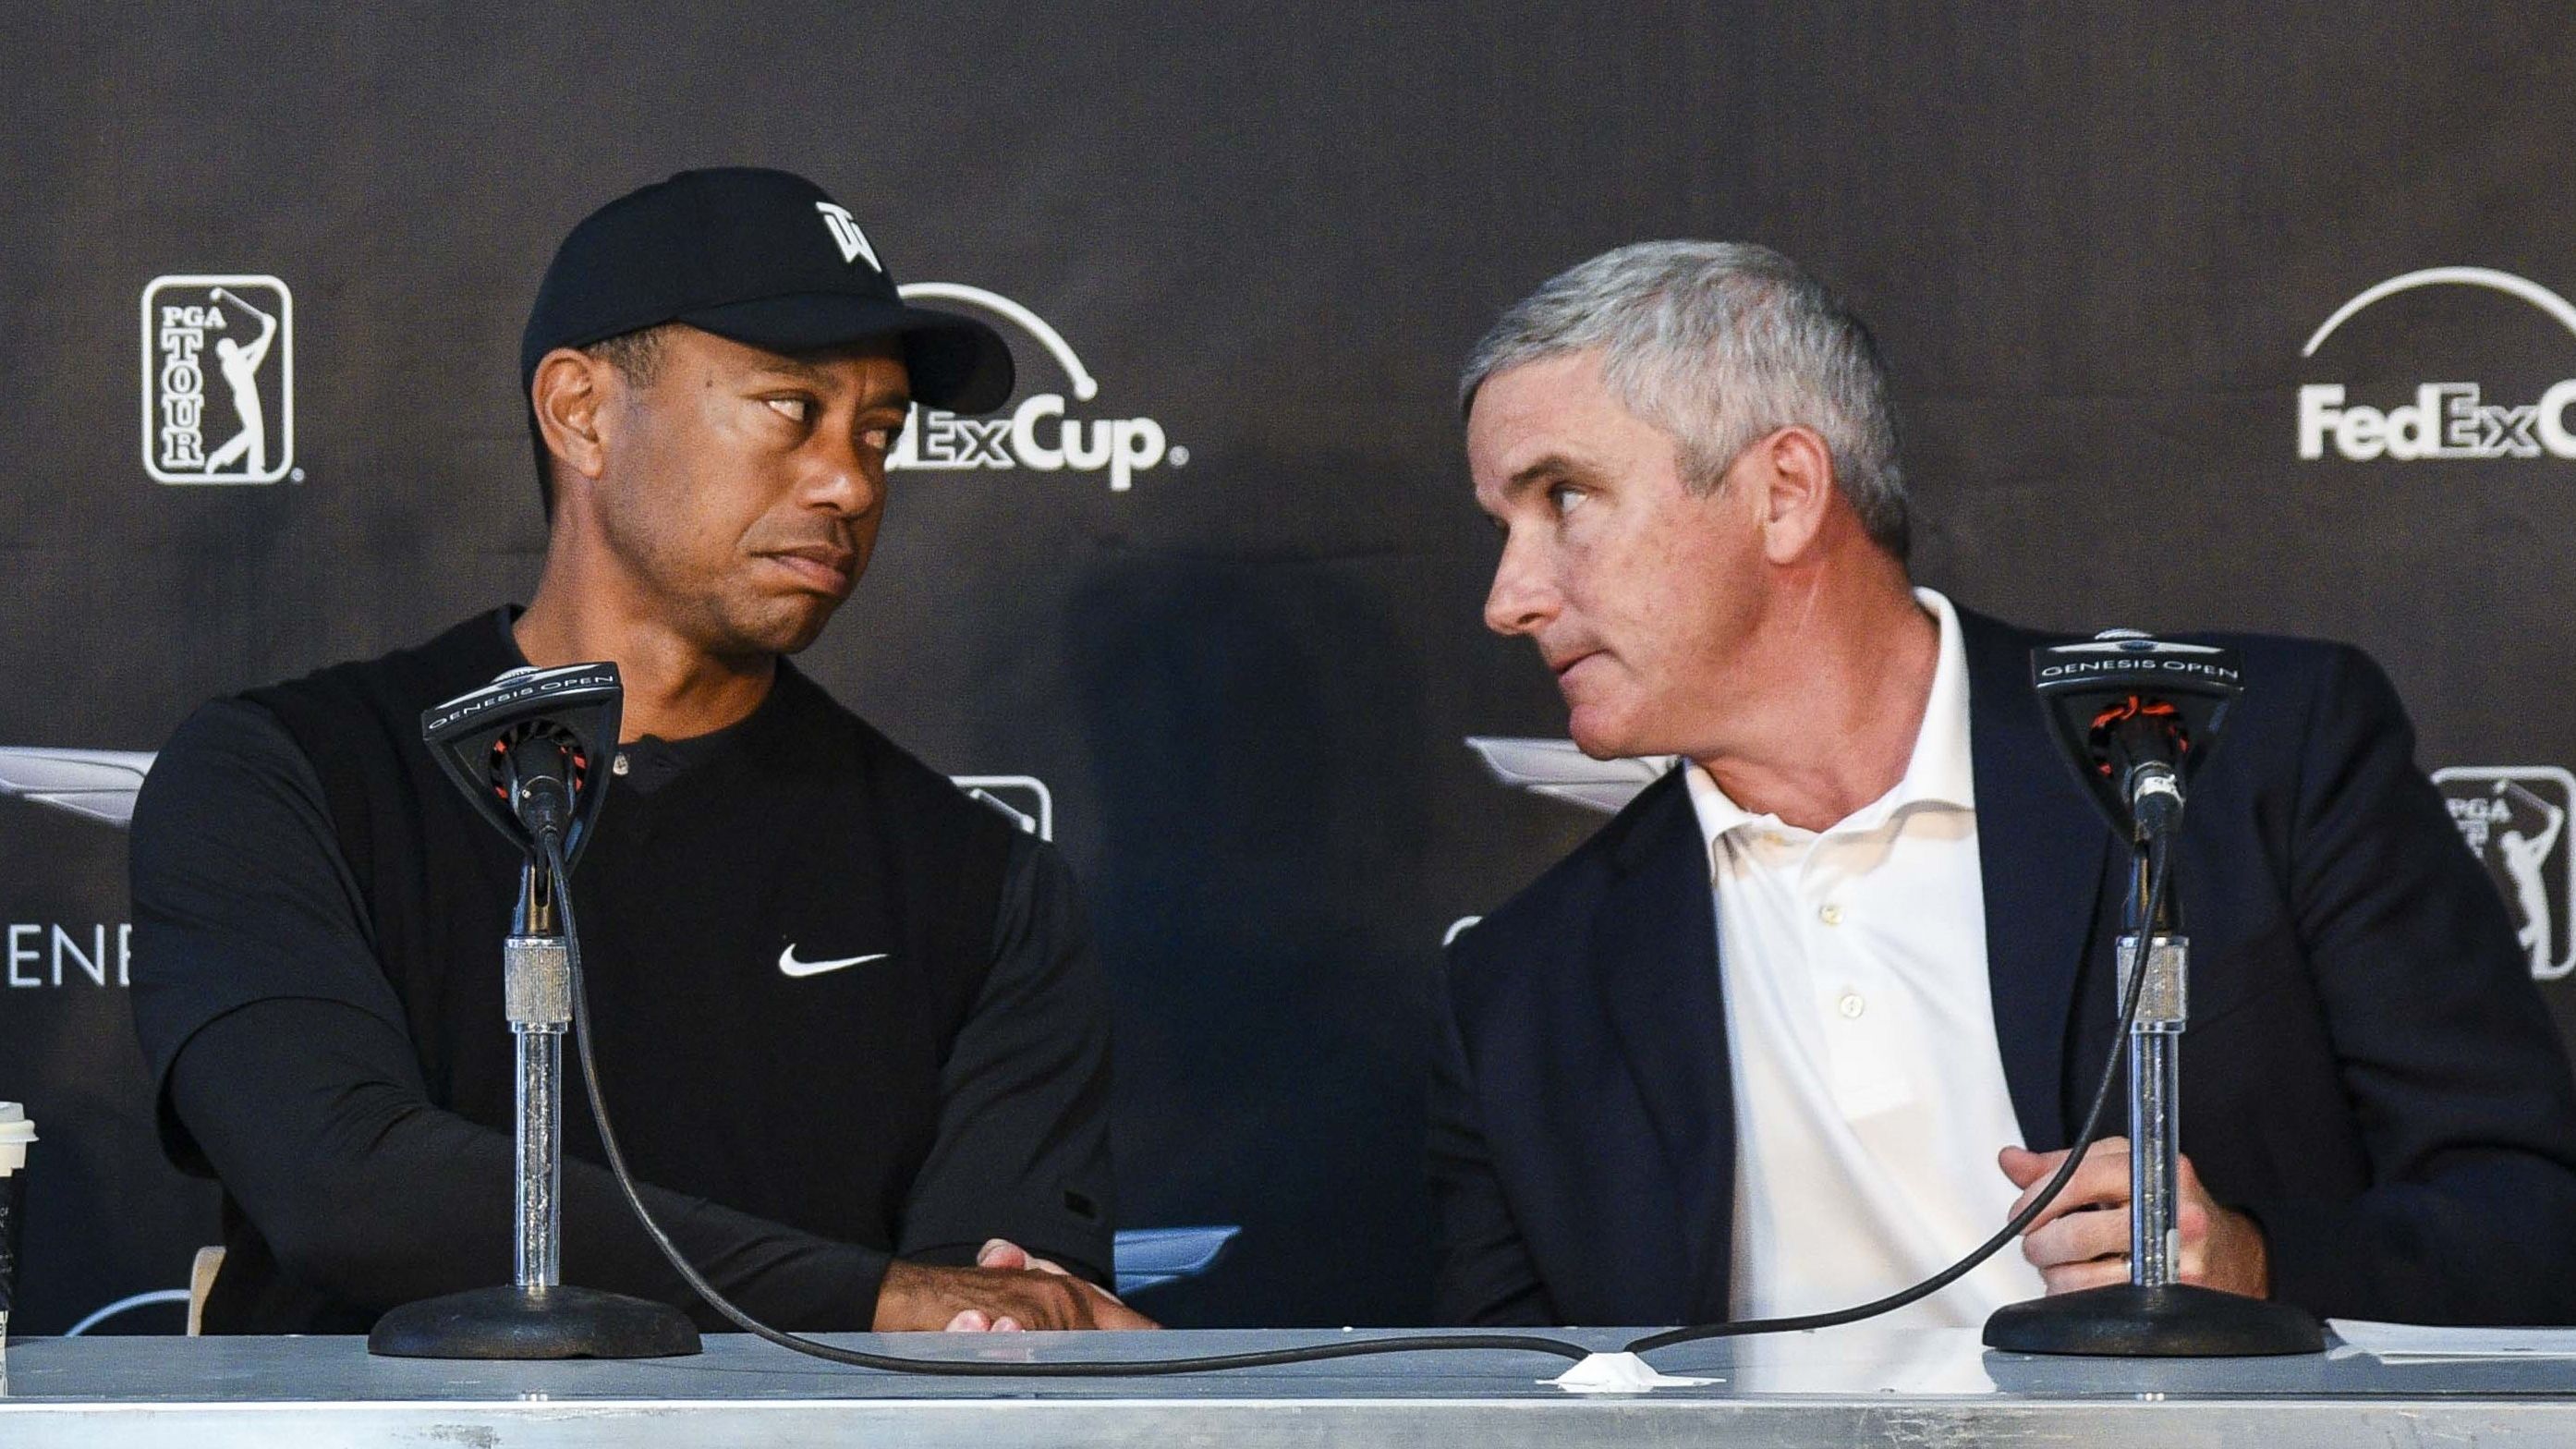 'We have a shared vision': Embattled PGA Tour chief's bizarre first press conference in seven months